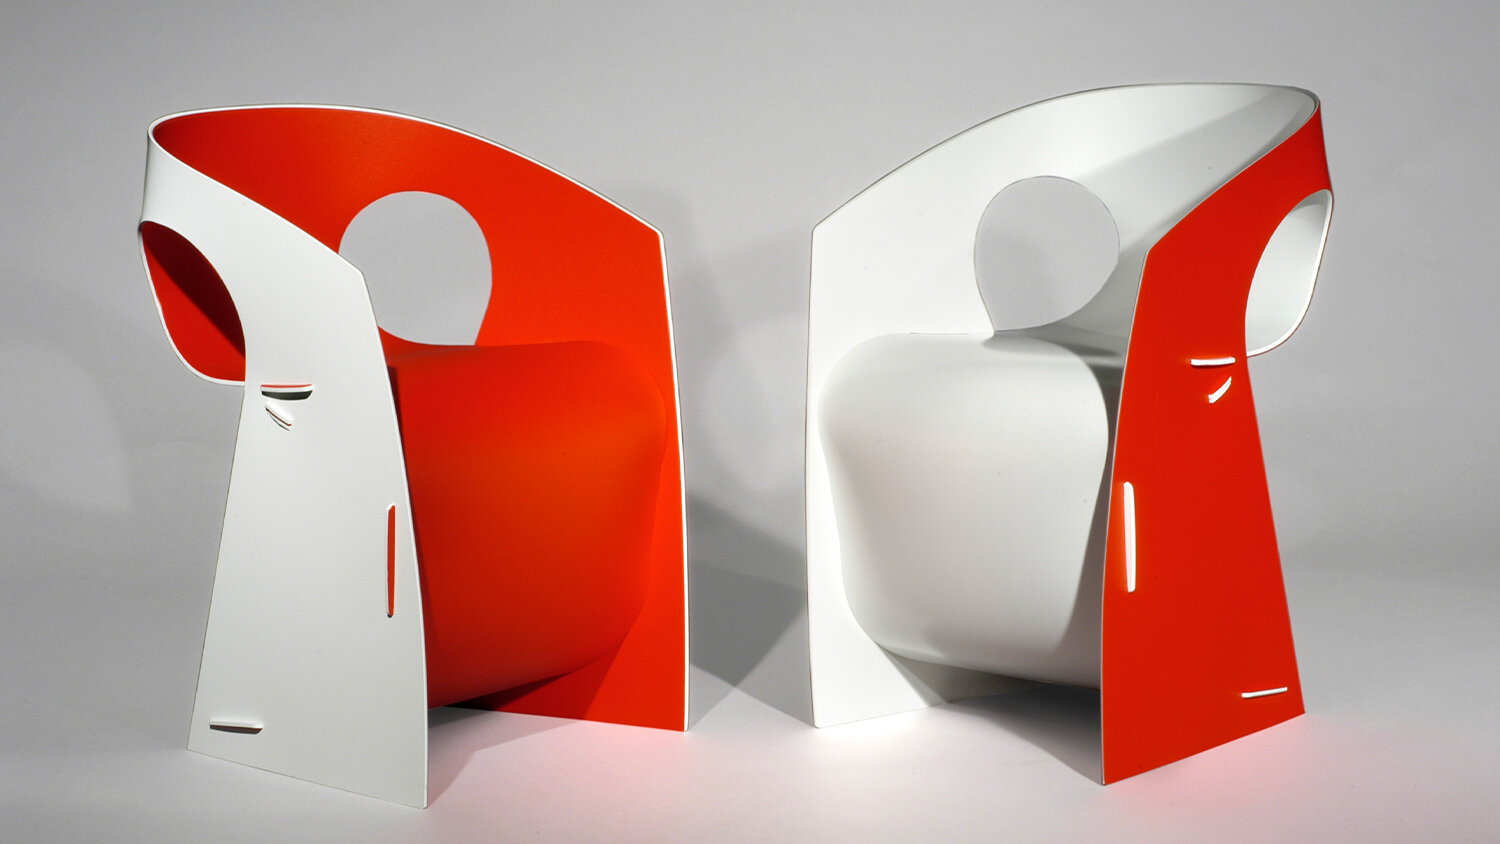 Blue-Marmalade-I-b-pop-recycled-plastic-chair-red-white-dining-chair-single-sheet-plastic-recyclable.jpg